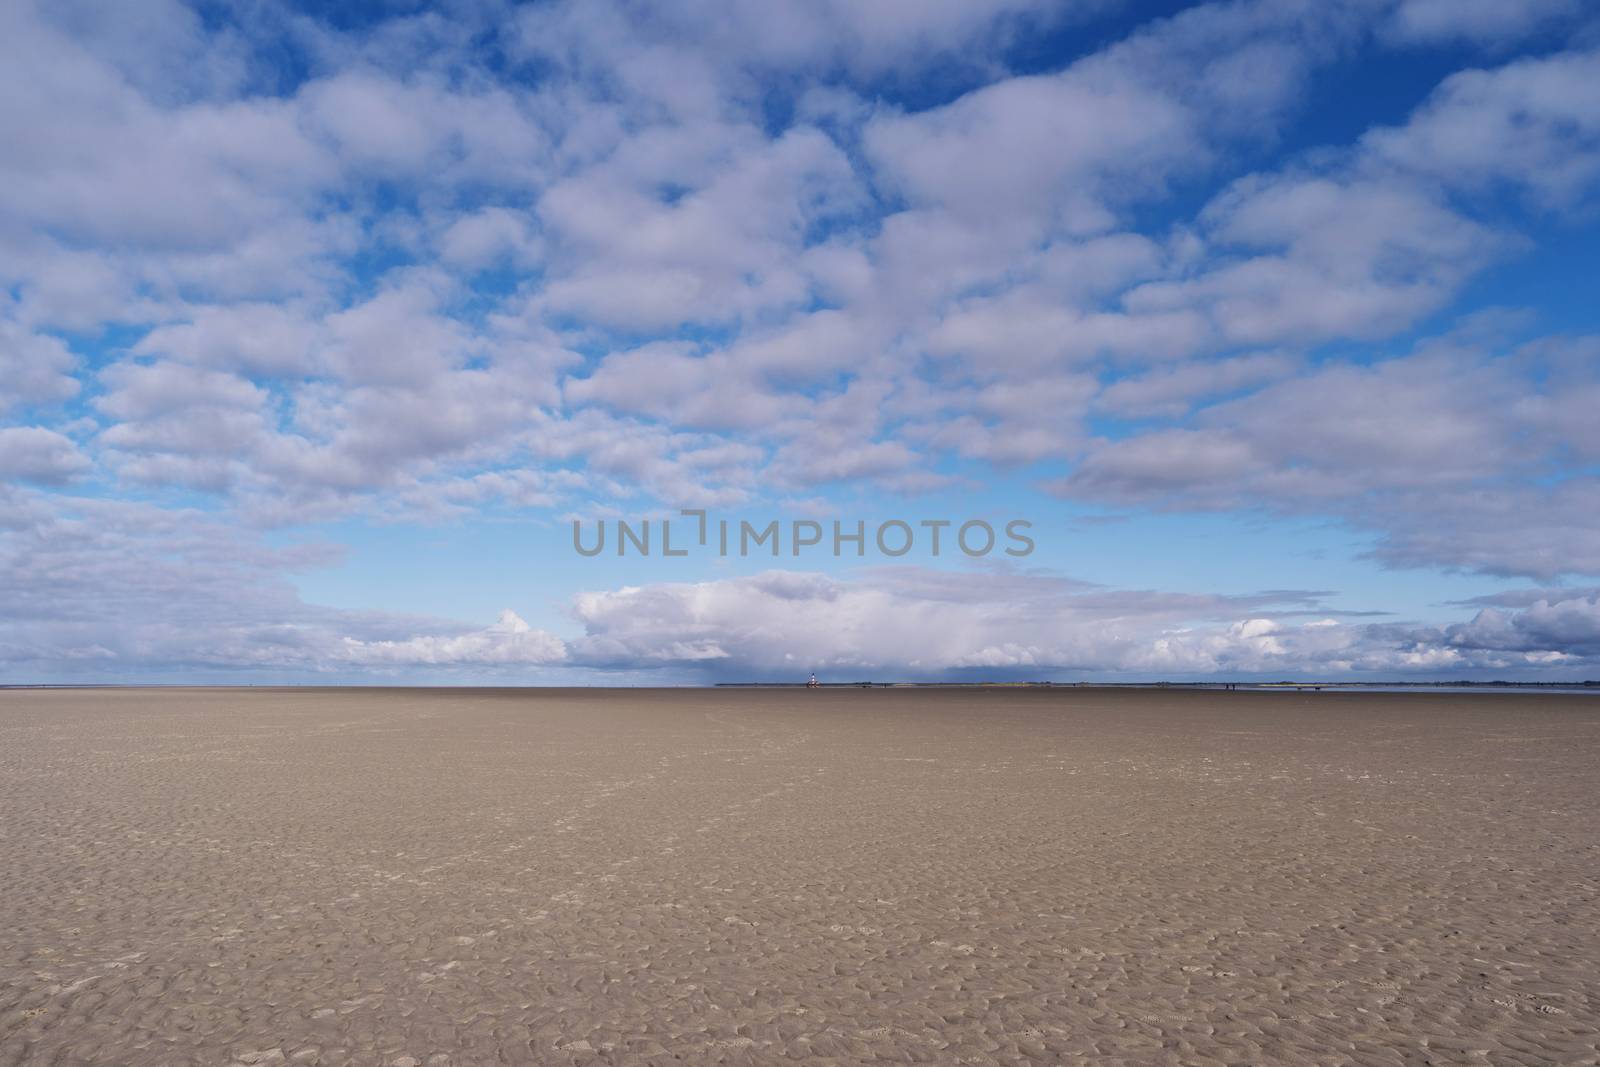 On the Beach of St. Peter-Ording in Germany by 3quarks